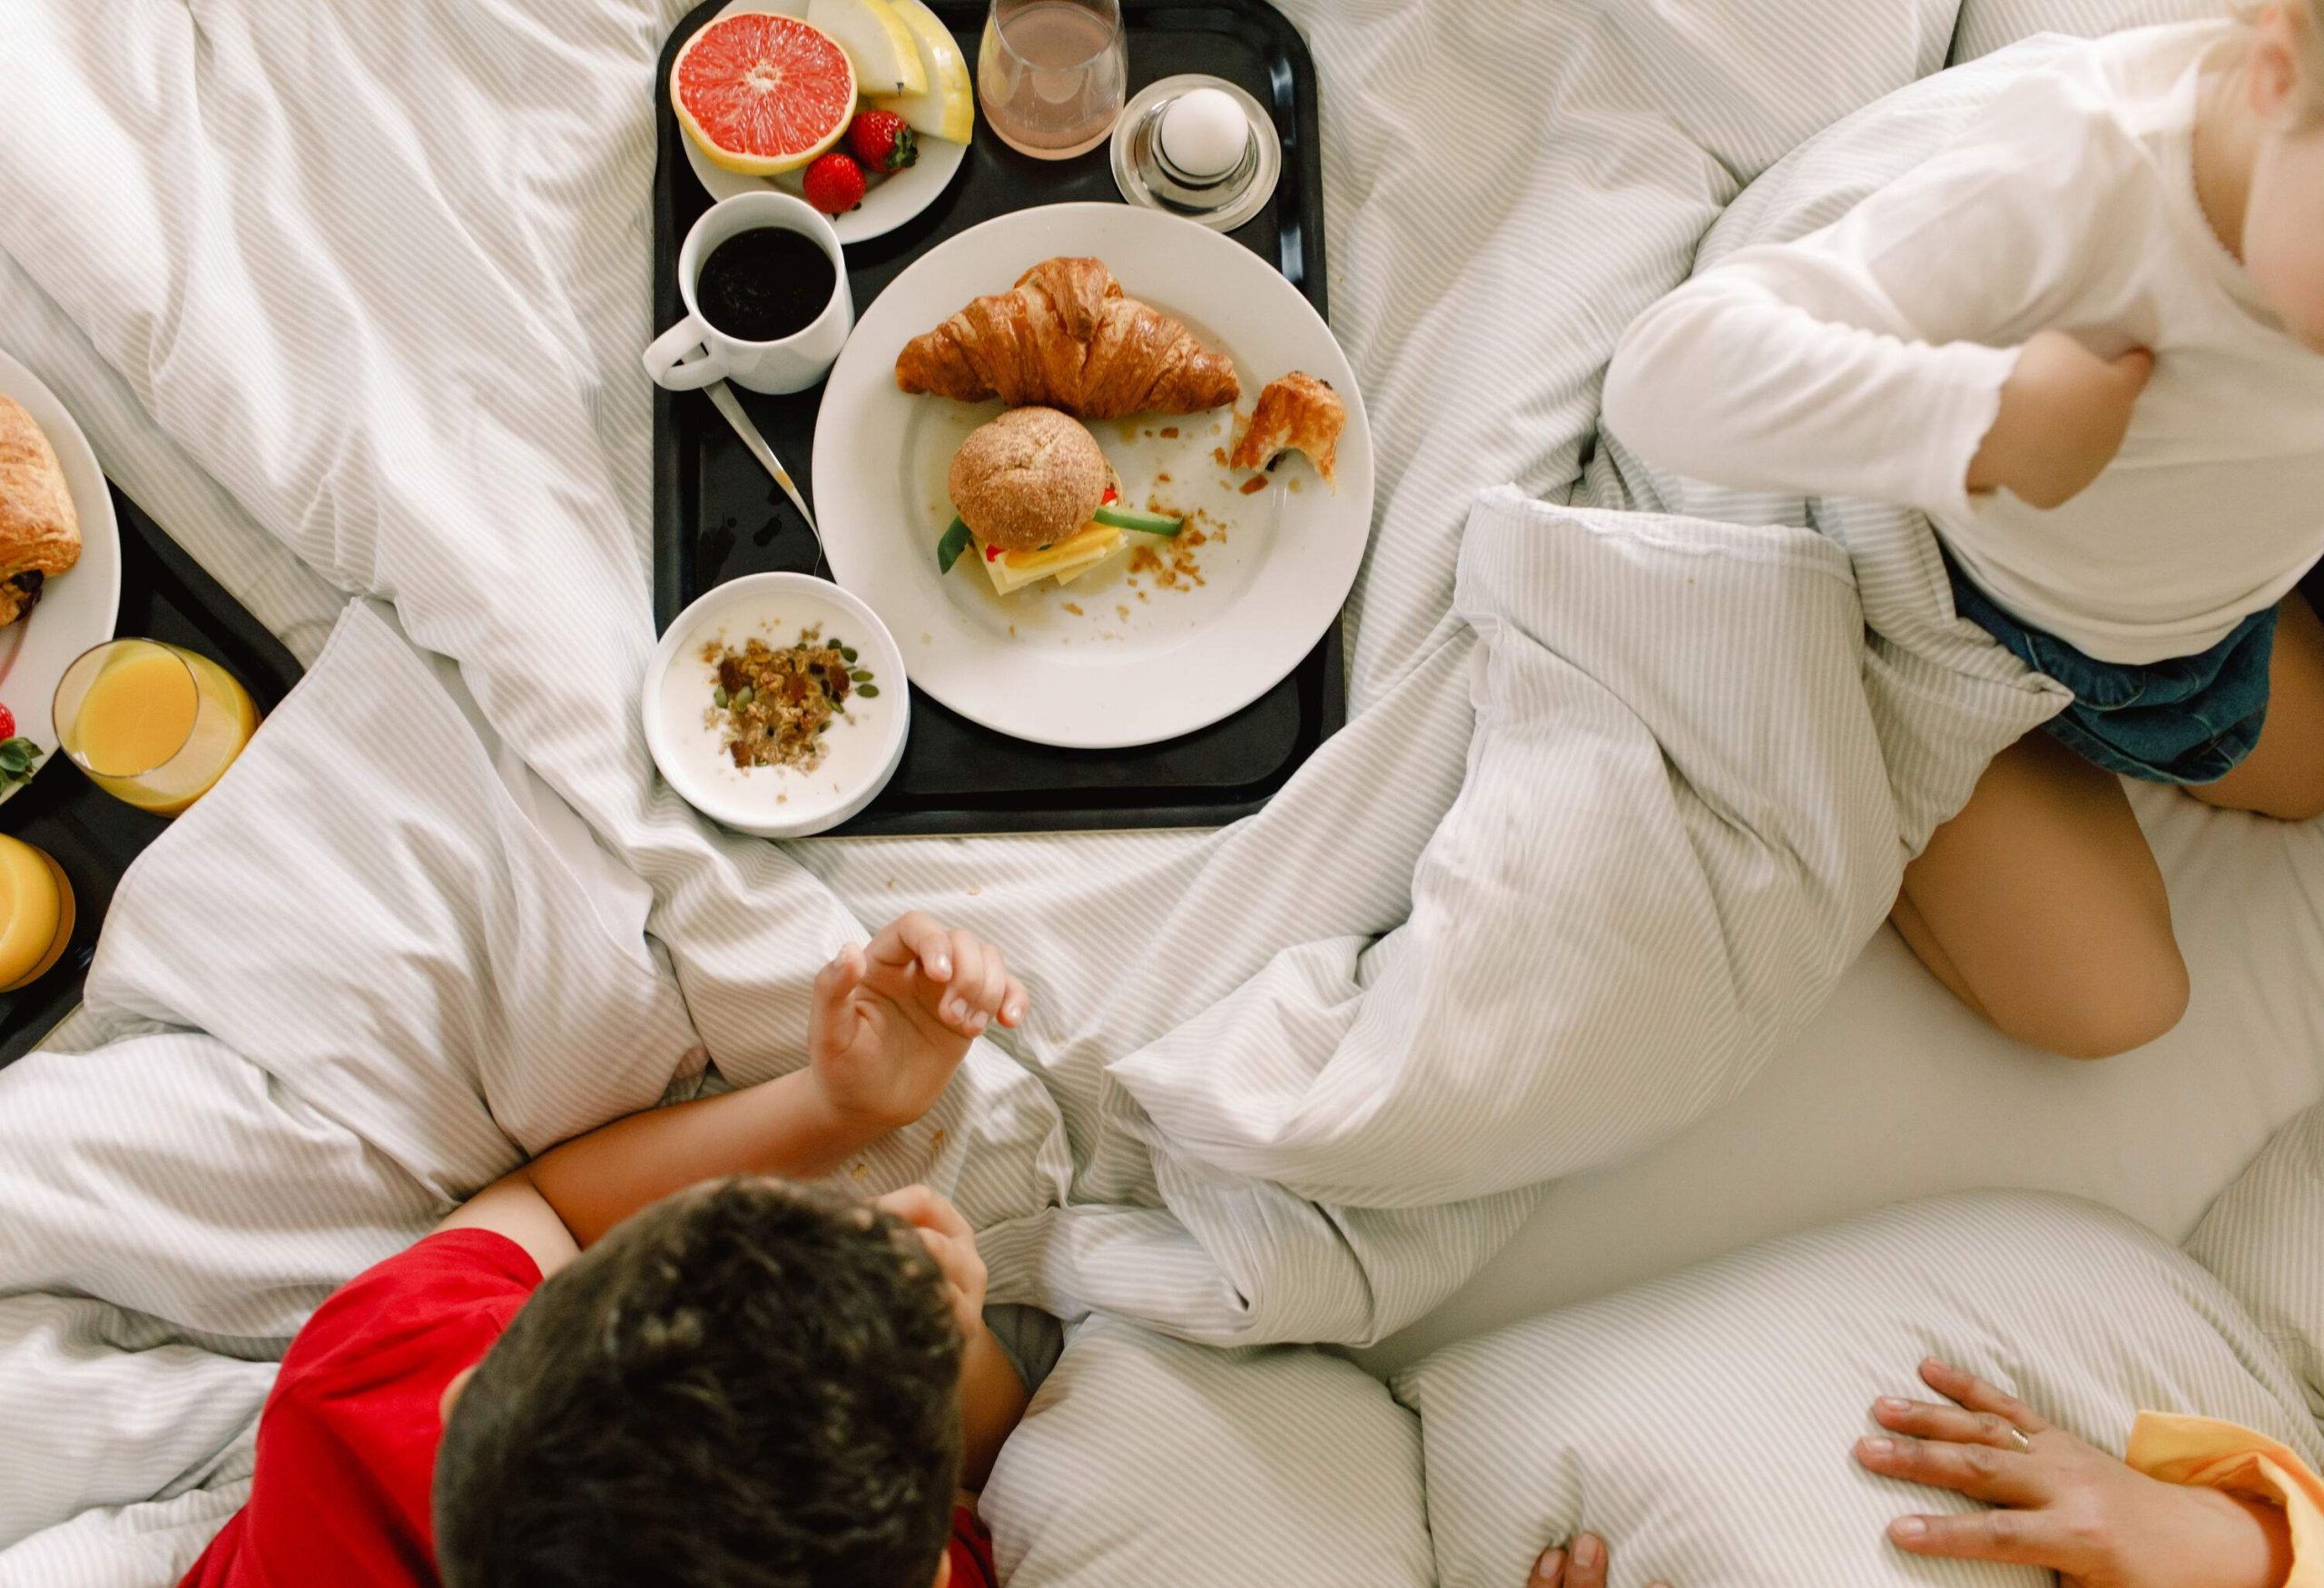 A group of kids on the bed with a tray of snacks including a plate of pastries and fresh fruits, a cup of coffee, and a bowl of cereal.